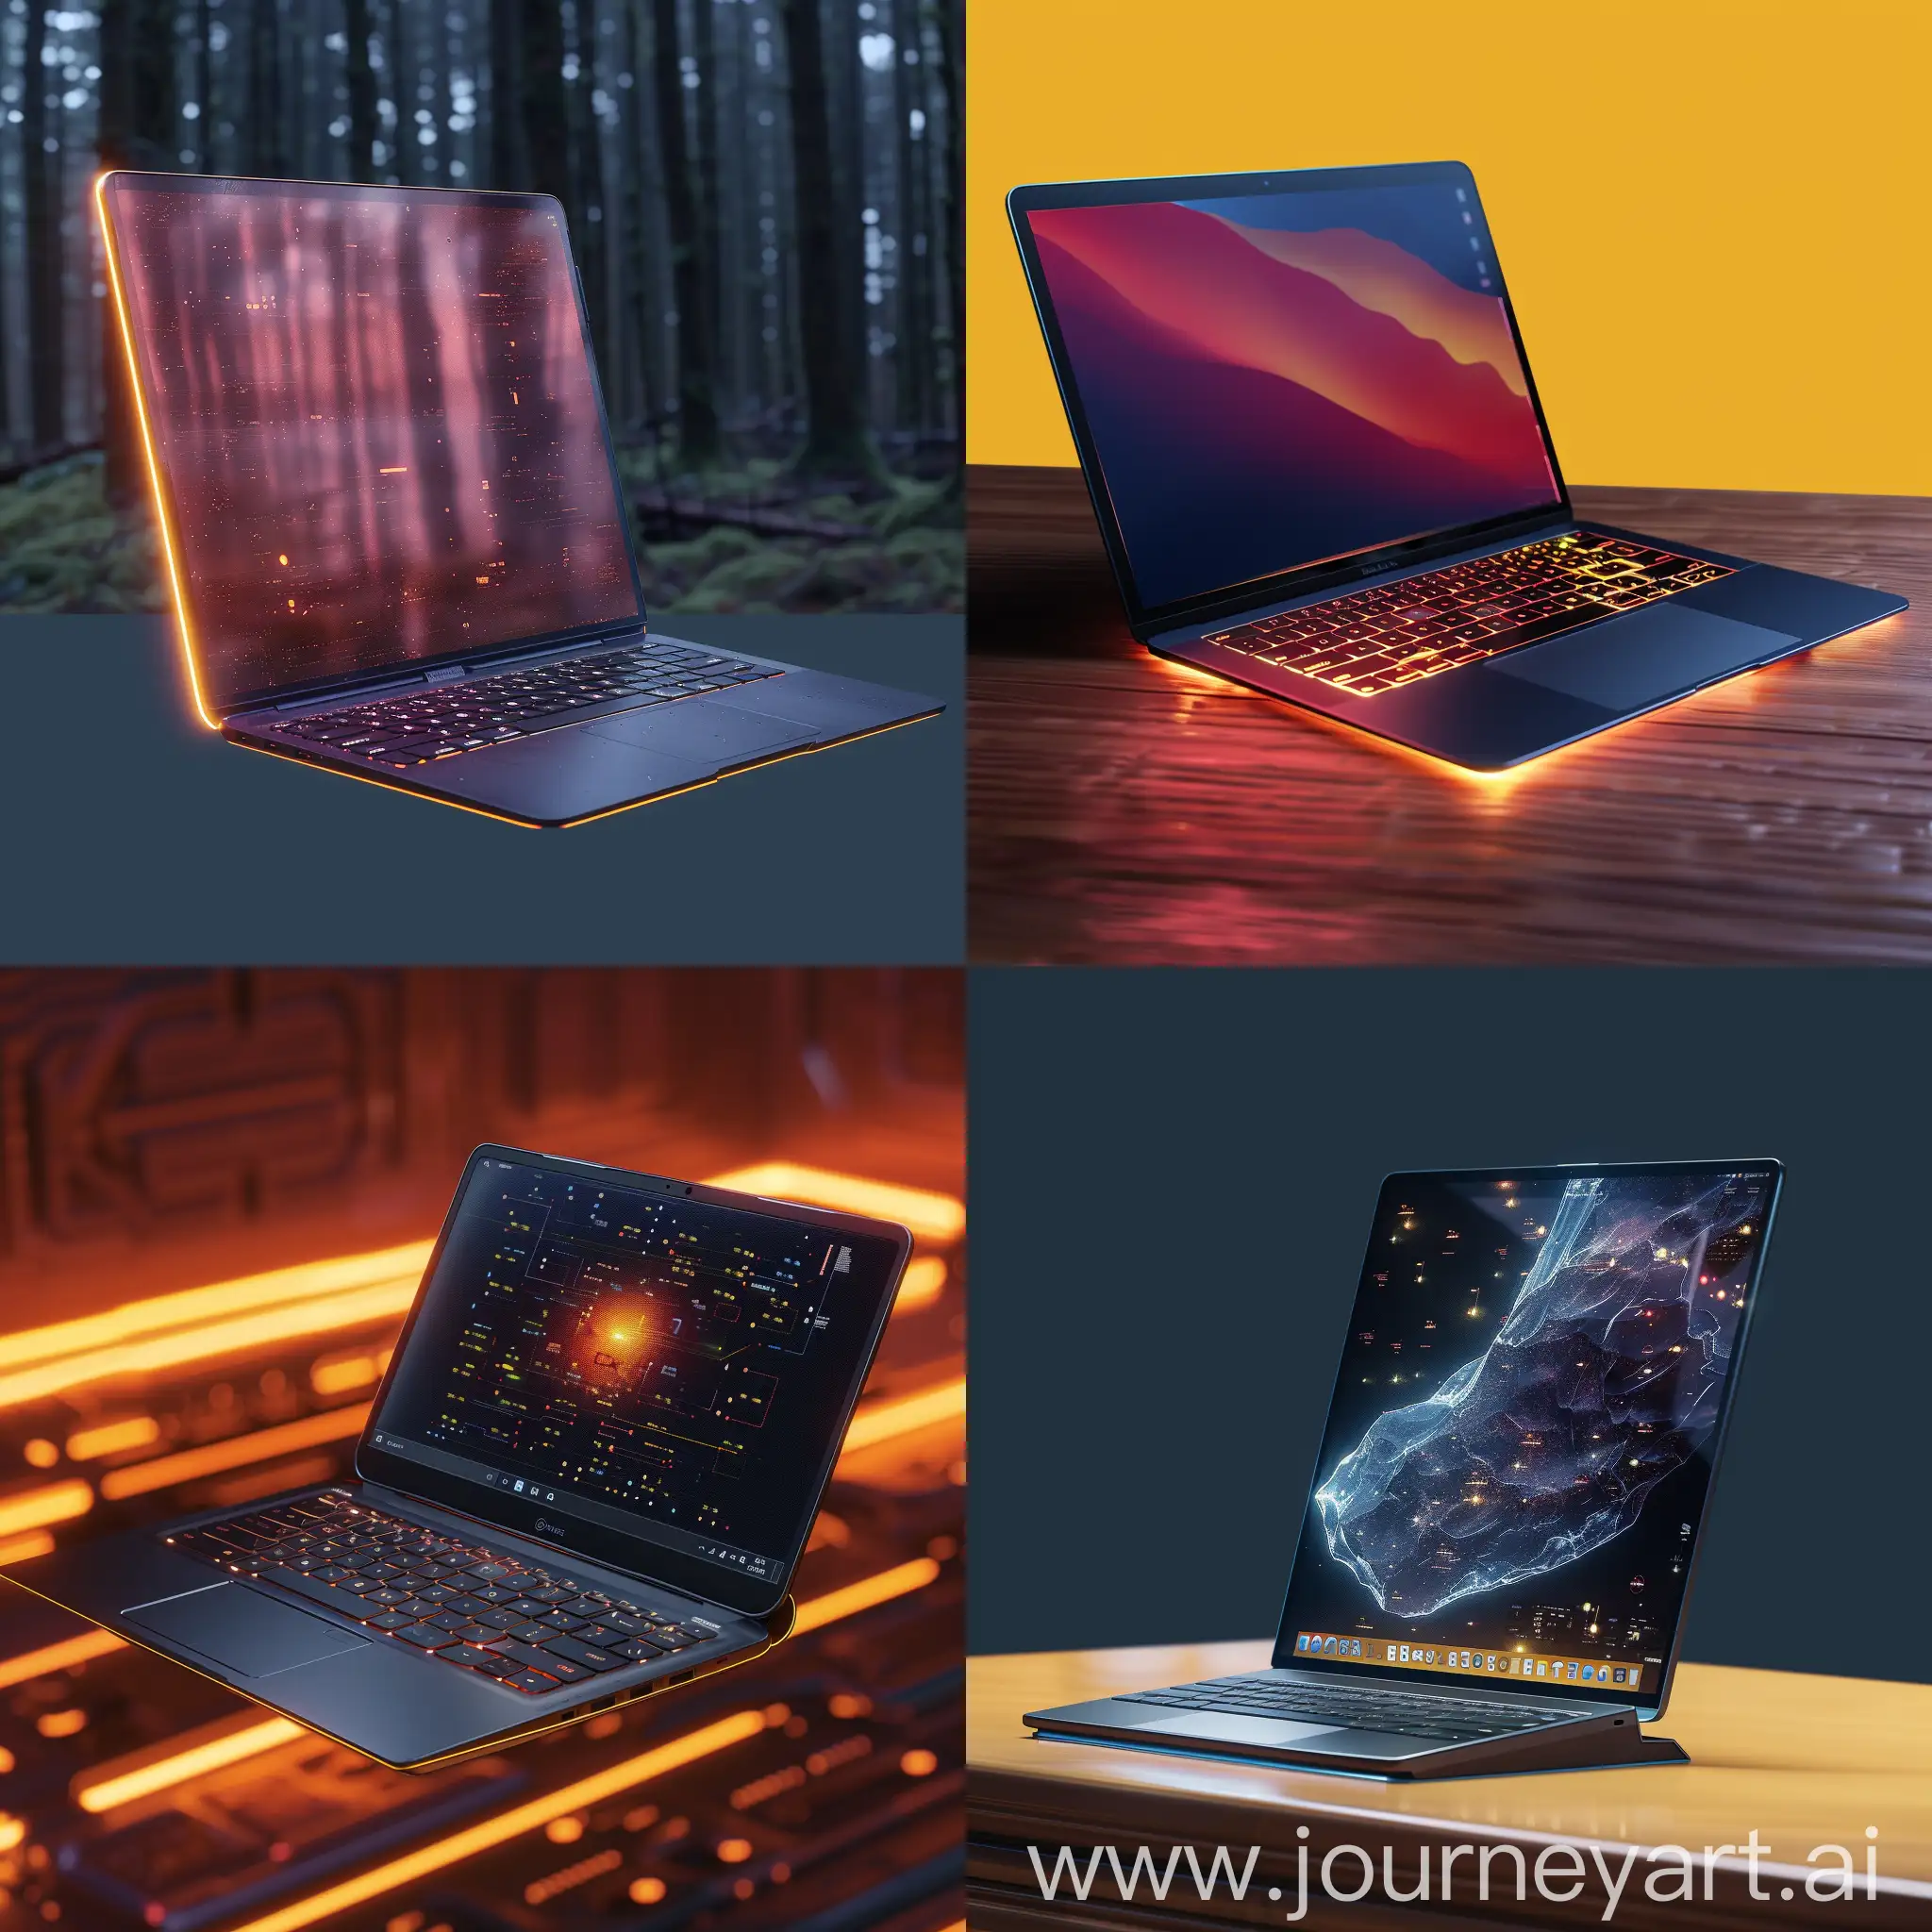 Futuristic-Laptop-with-Holographic-Display-and-Flexible-Design